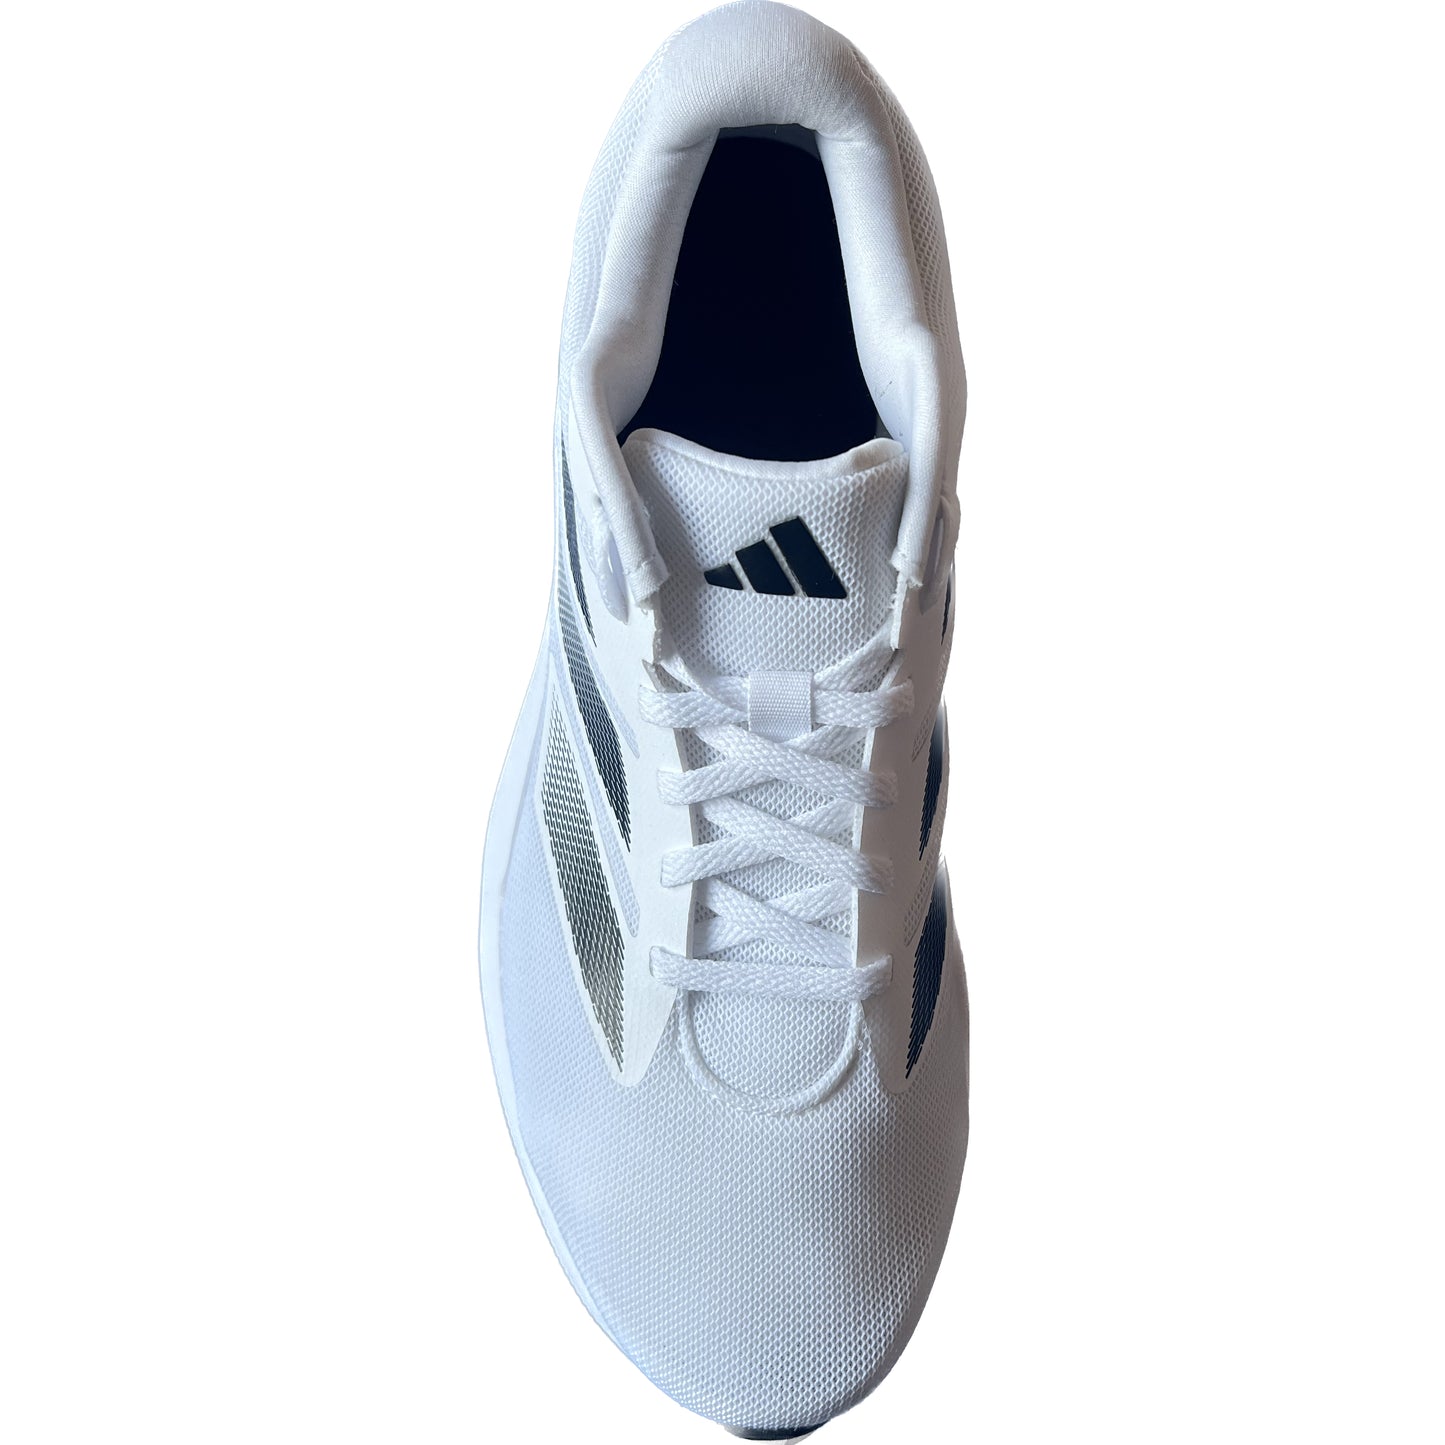 Pre-Spiked Adidas Duramo RC Men's Trainers Cricket Shoes